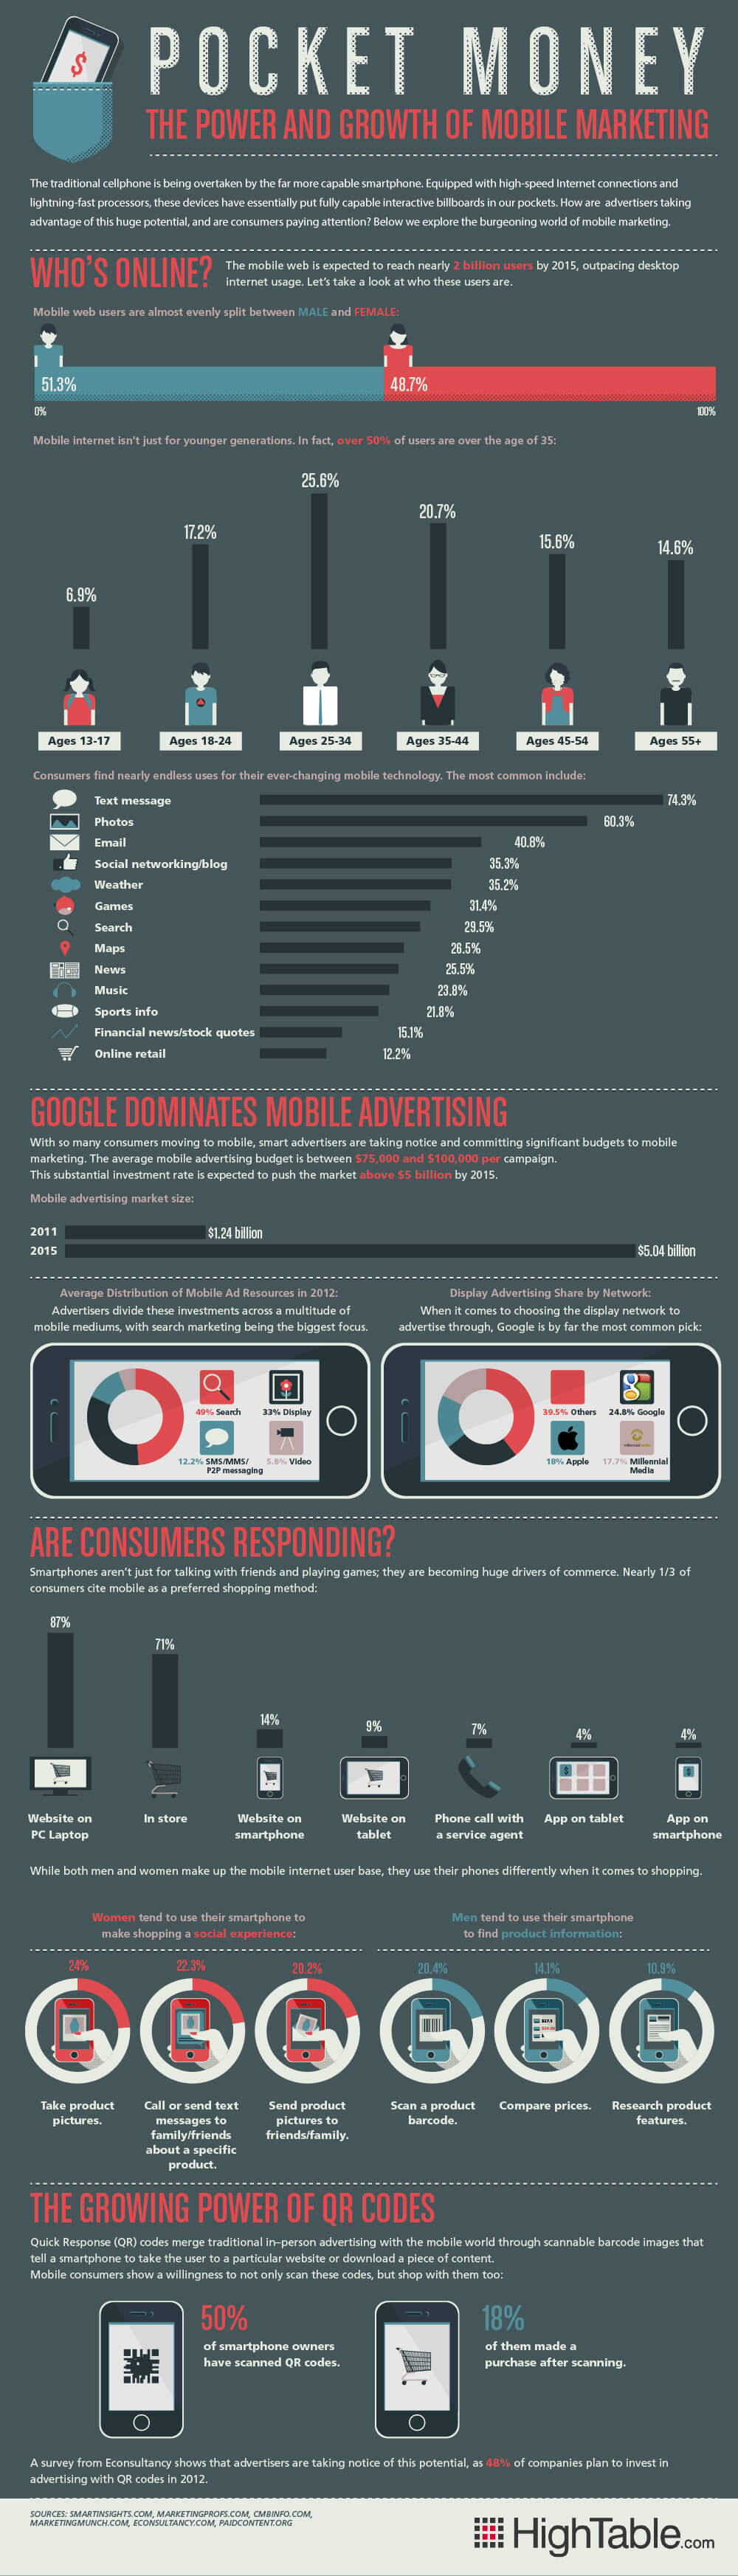 Pocket Money: The Power and Growth of Mobile Marketing